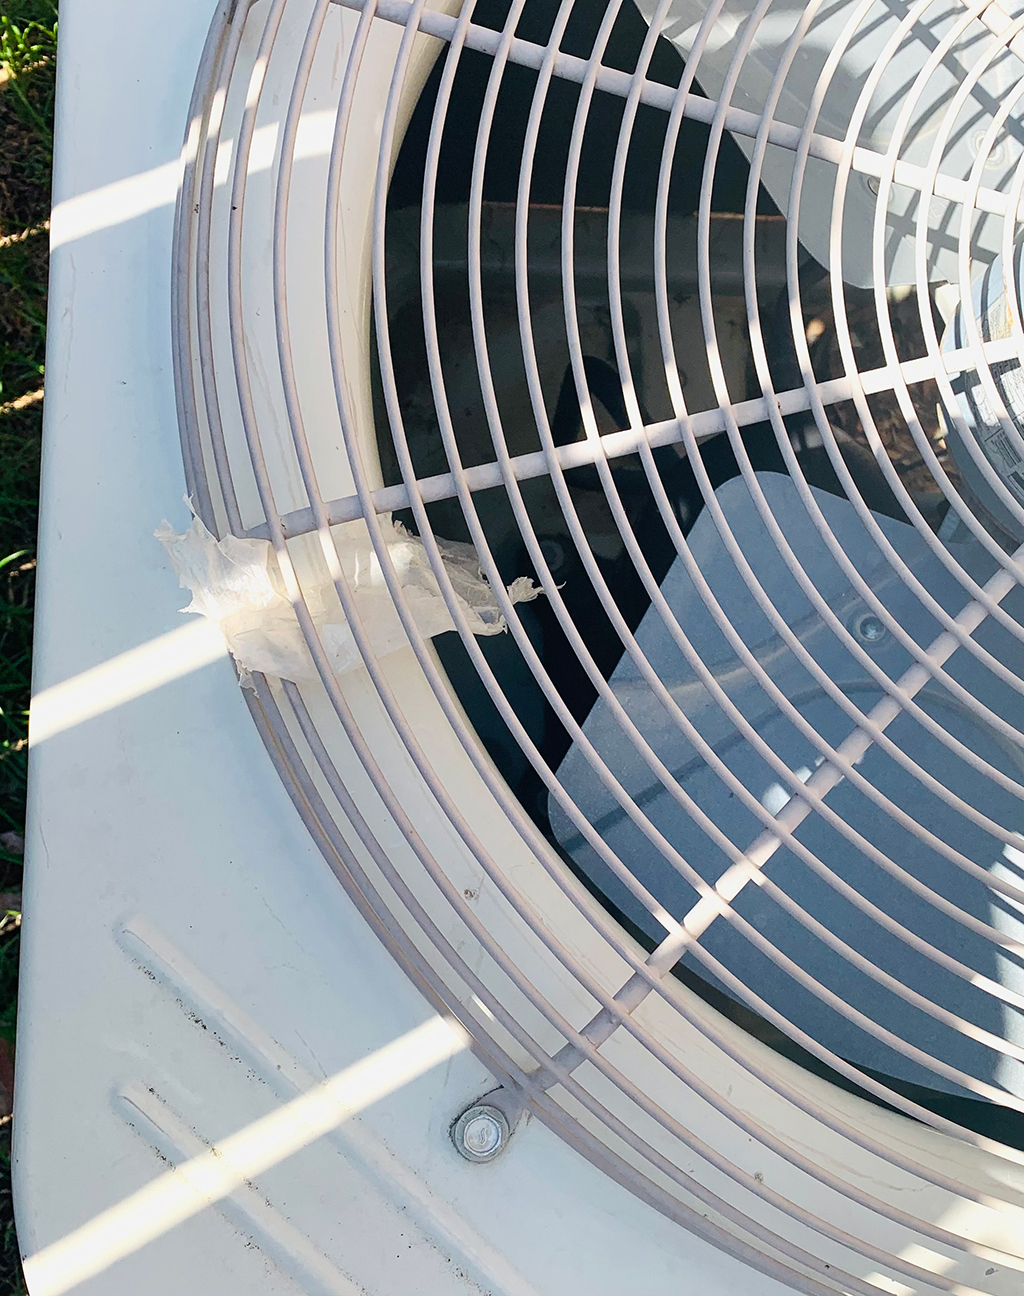 Air Conditioning Advice: How To Get The AC System Ready For Summer With AC Repair | Arlington, TX